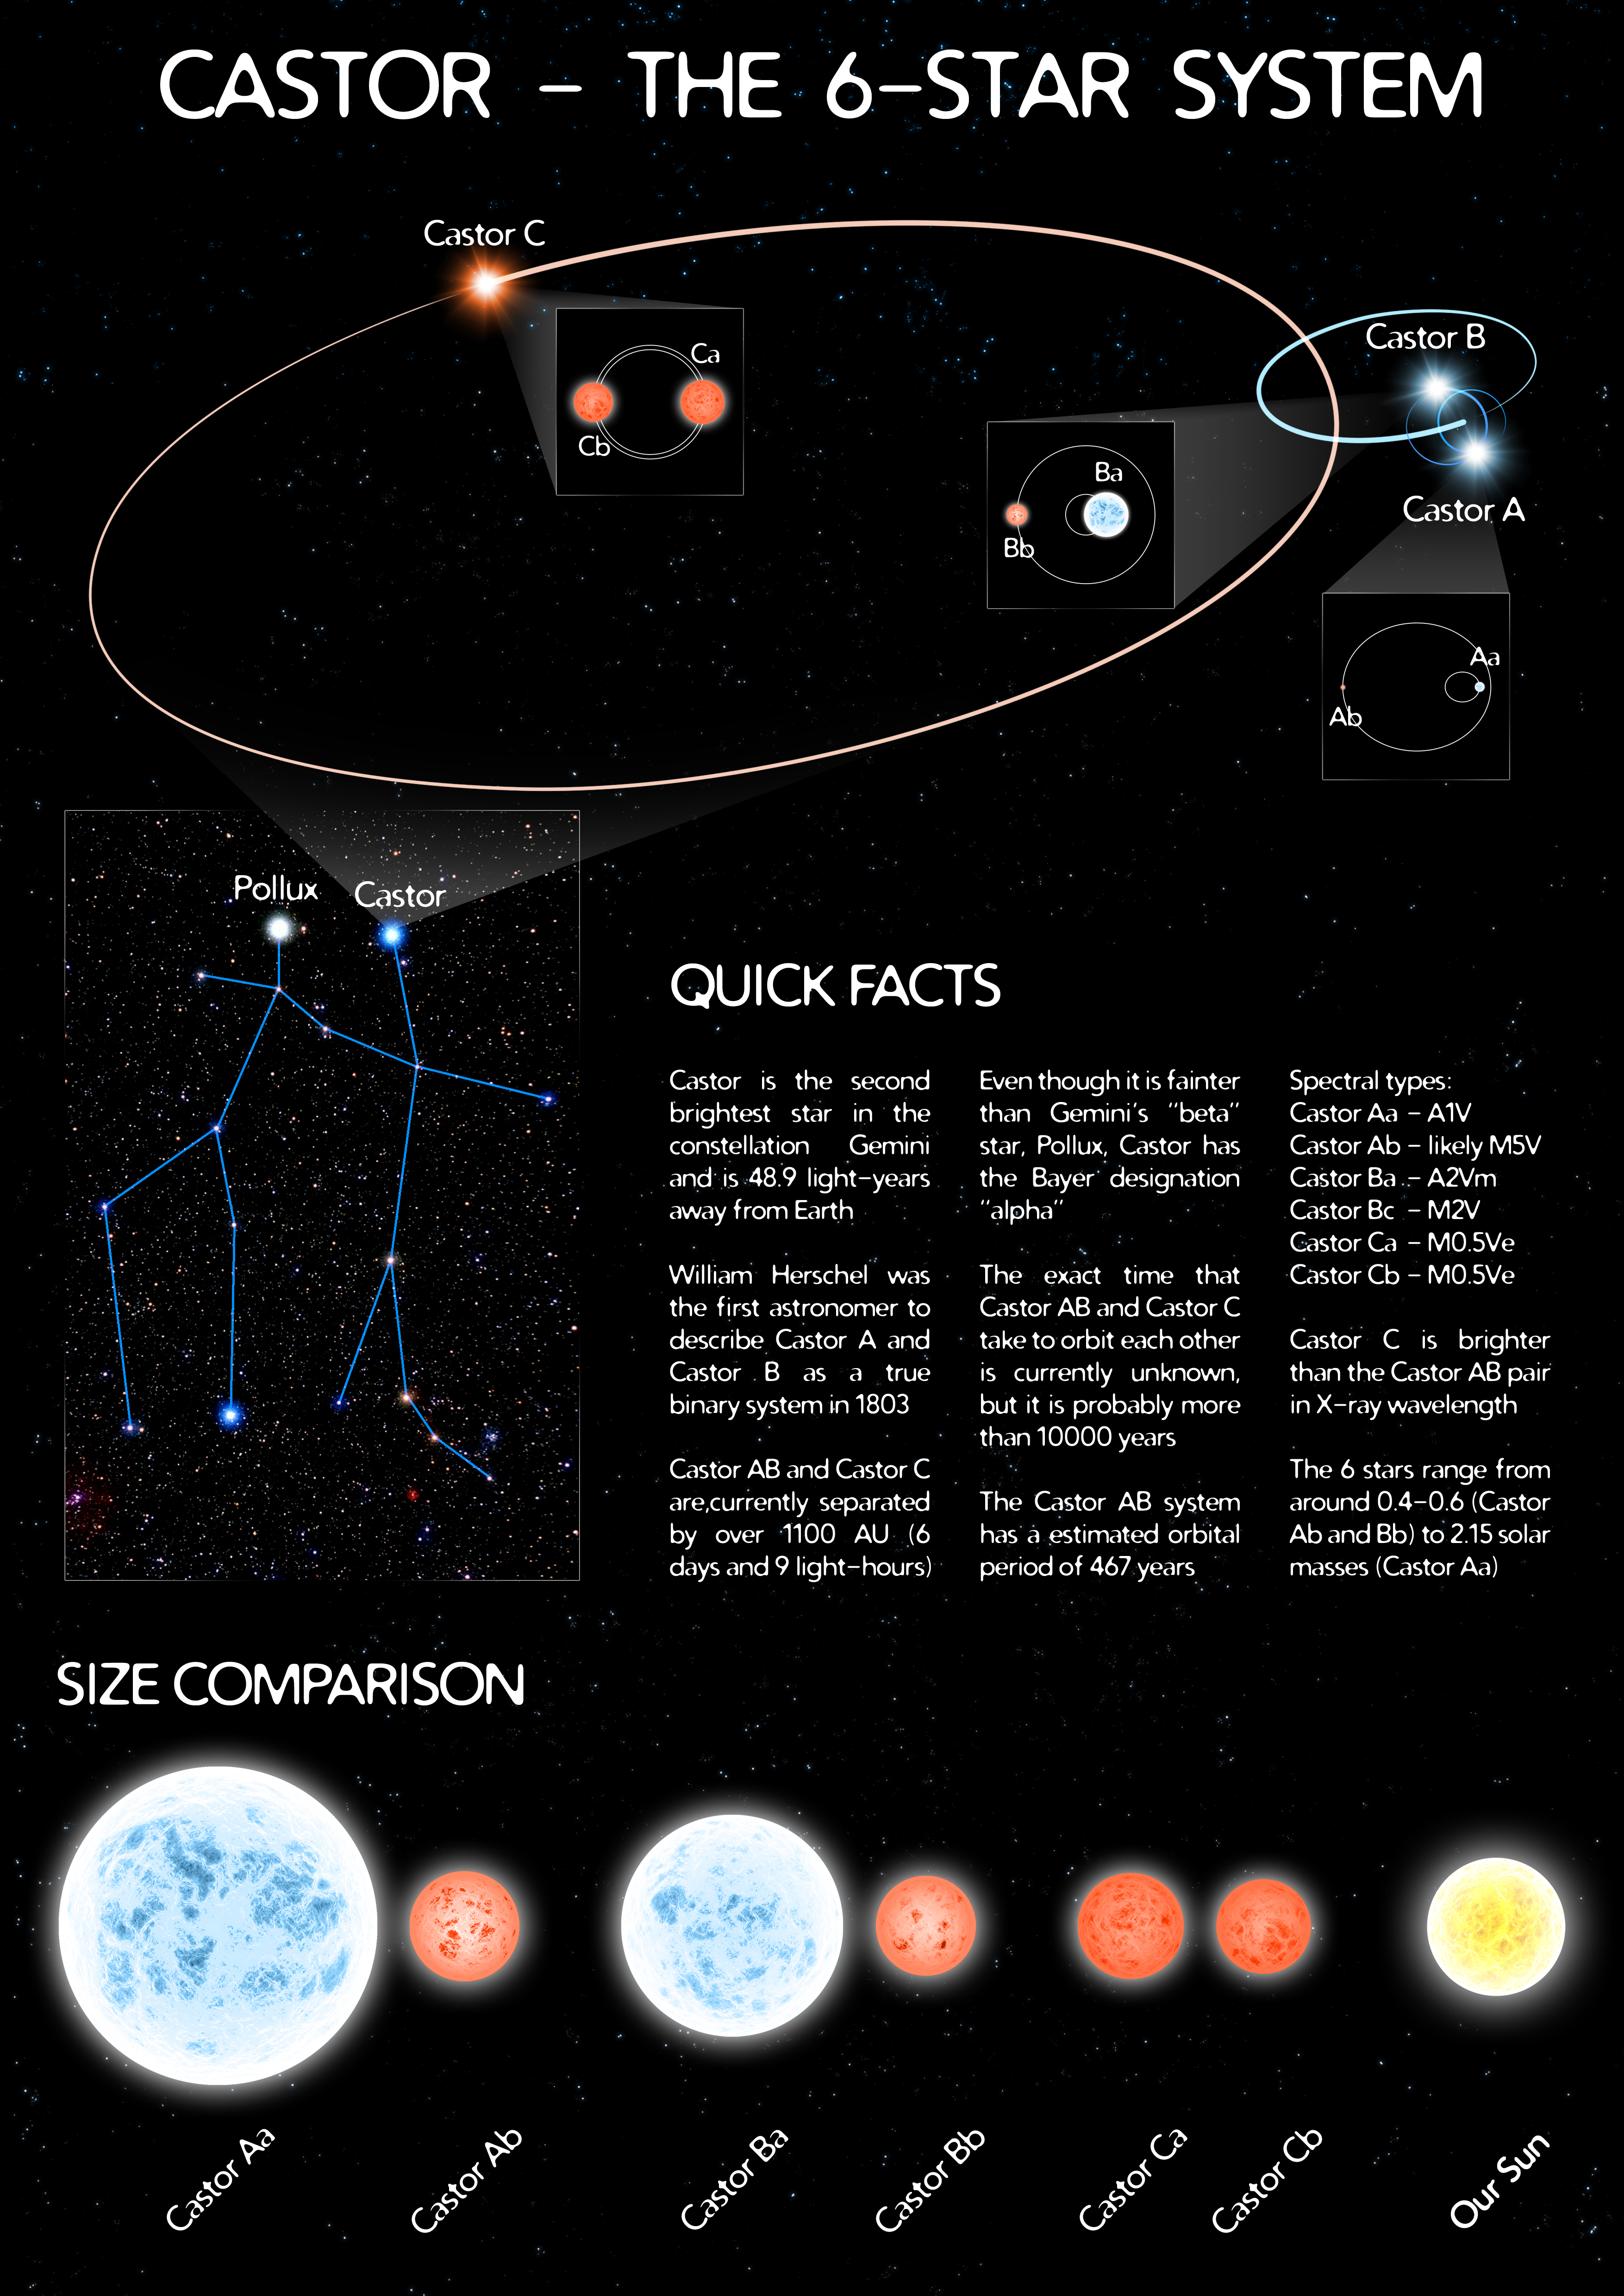 Castor, the 6-star birth system infographic.